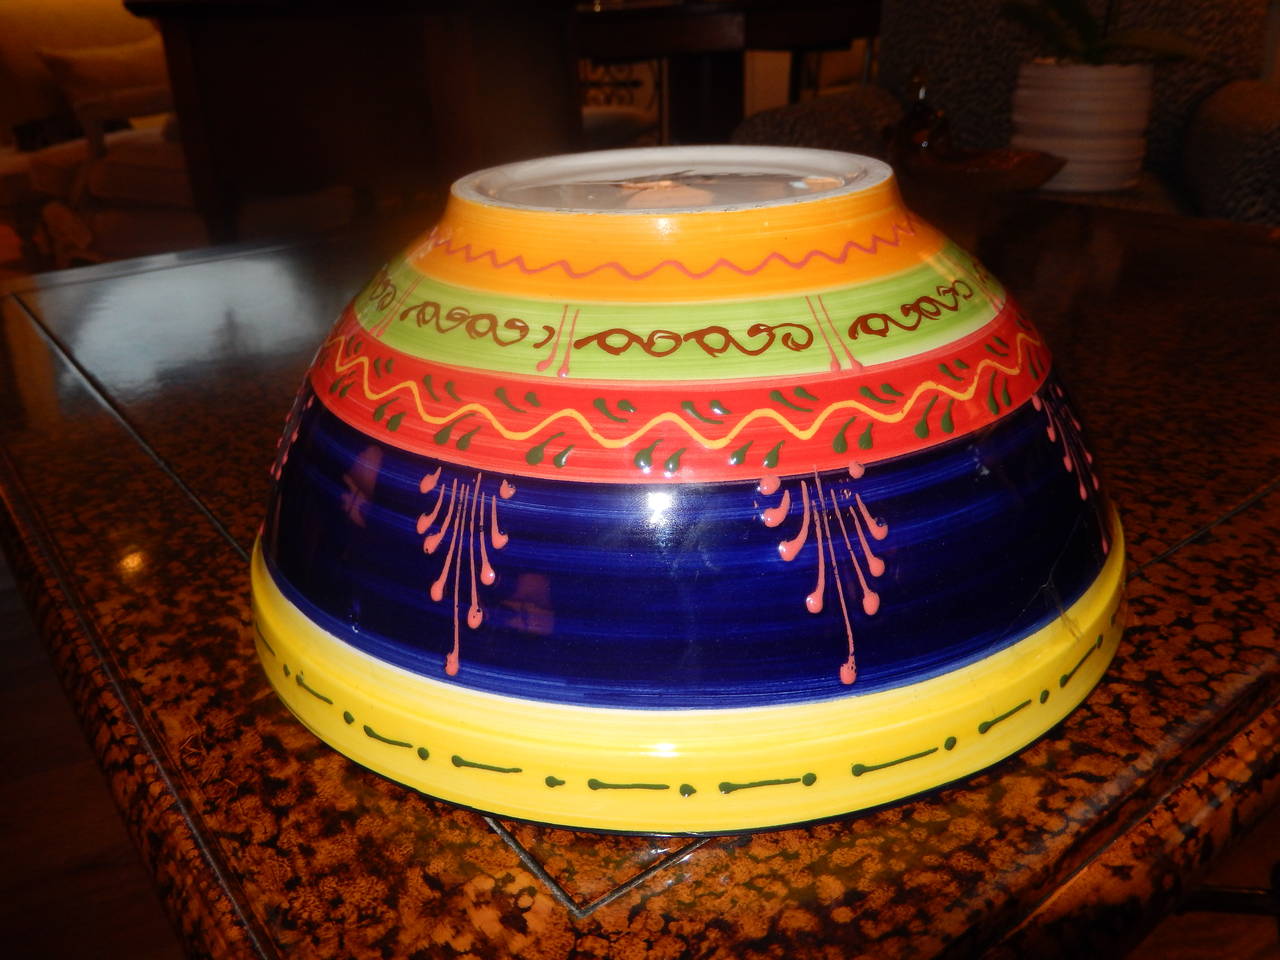 A colorful hand crafted  ceramic bowl in reds, yellow, blues, bright orange and green.
Relief patterns   around the bowl, modern and vibrant.